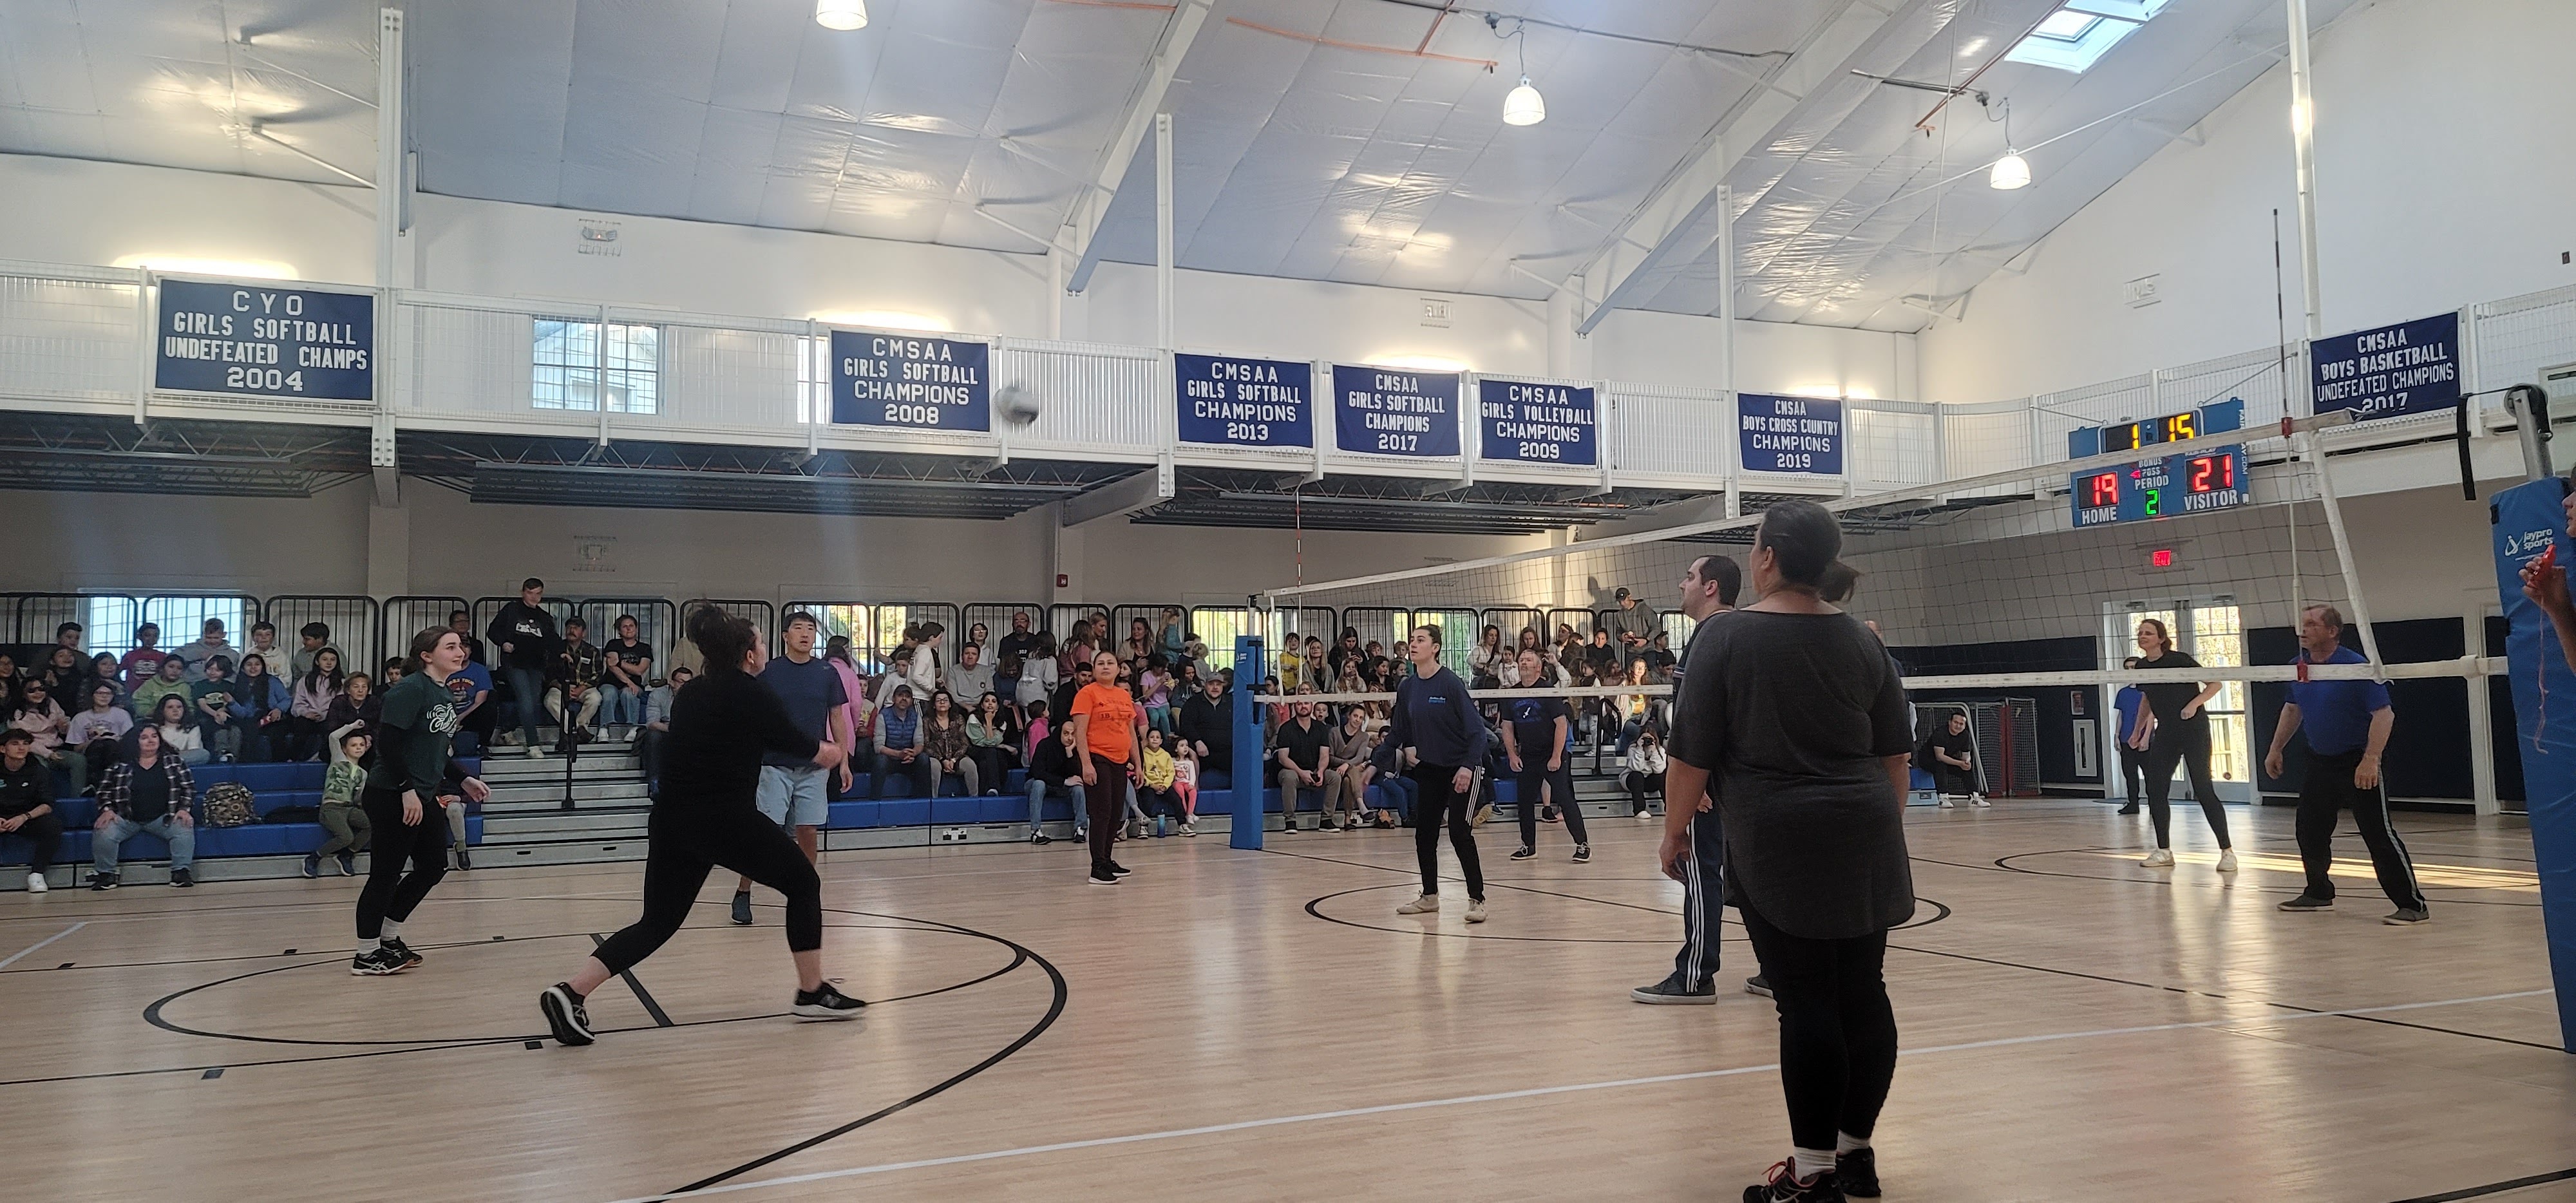 Our Lady of the Hamptons School's  Prep 8 class hosted a faculty-parent-student volleyball event with a packed house of fans. Faculty took the win. At the close of the event, the championship banner for the boys basketball team was unveiled. COURTESY OUR LADY OF THE HAMPTONS SCHOOL